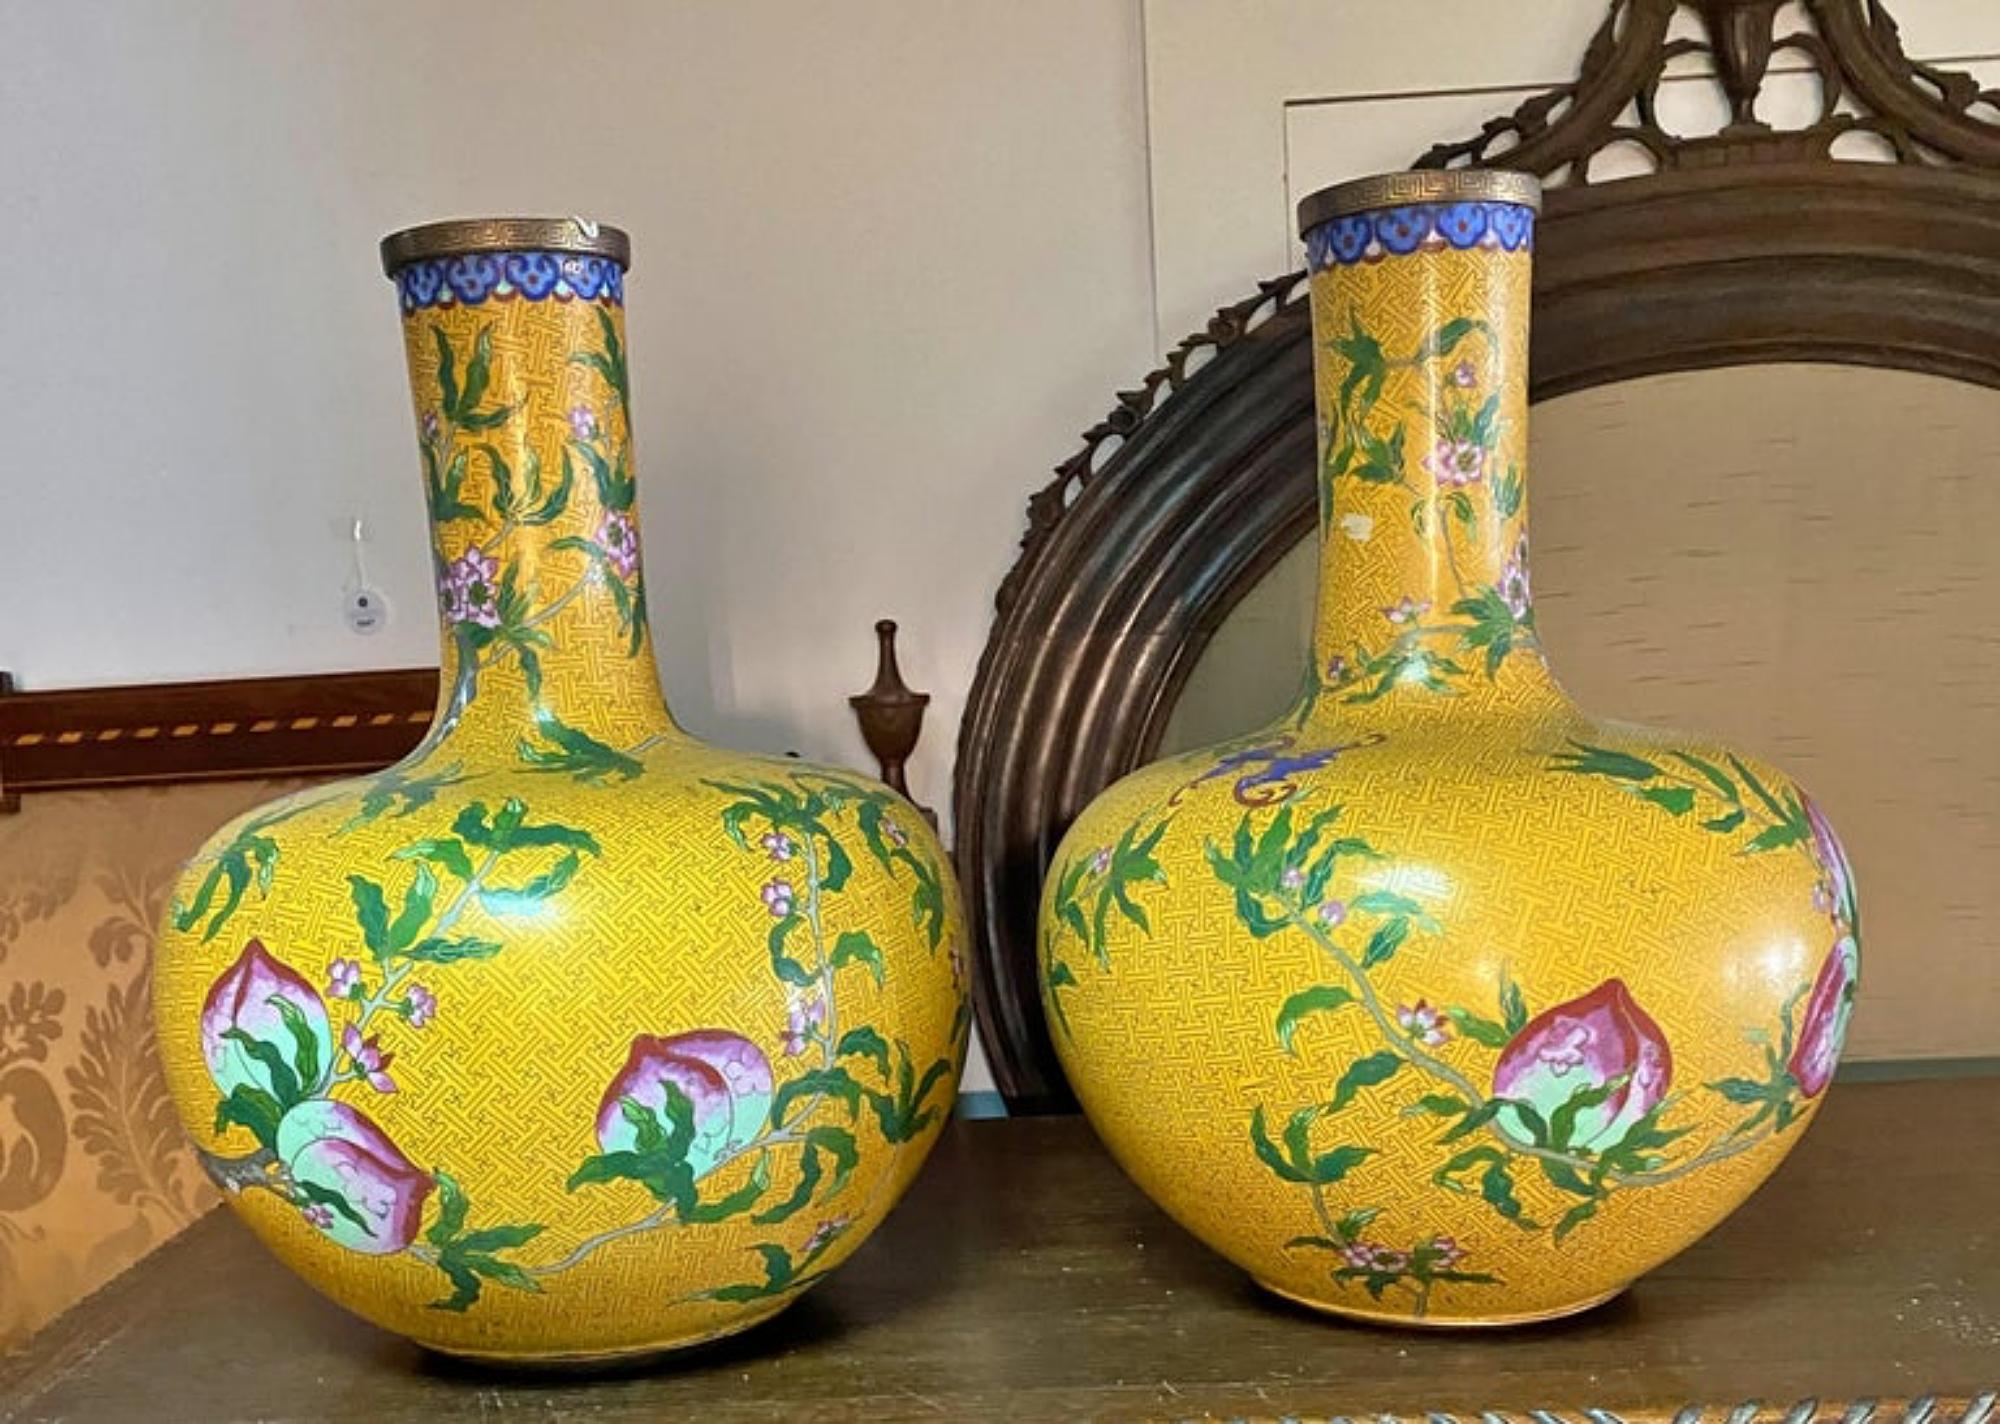 Pair of jars.
Chinese from the 19th century, 
in cloisonné metal, in shades of yellow and polychrome. 
Decorated with peaches, bats and prunus branches. 
Three character marks on the base. 
Measure: Height: 54 cm.